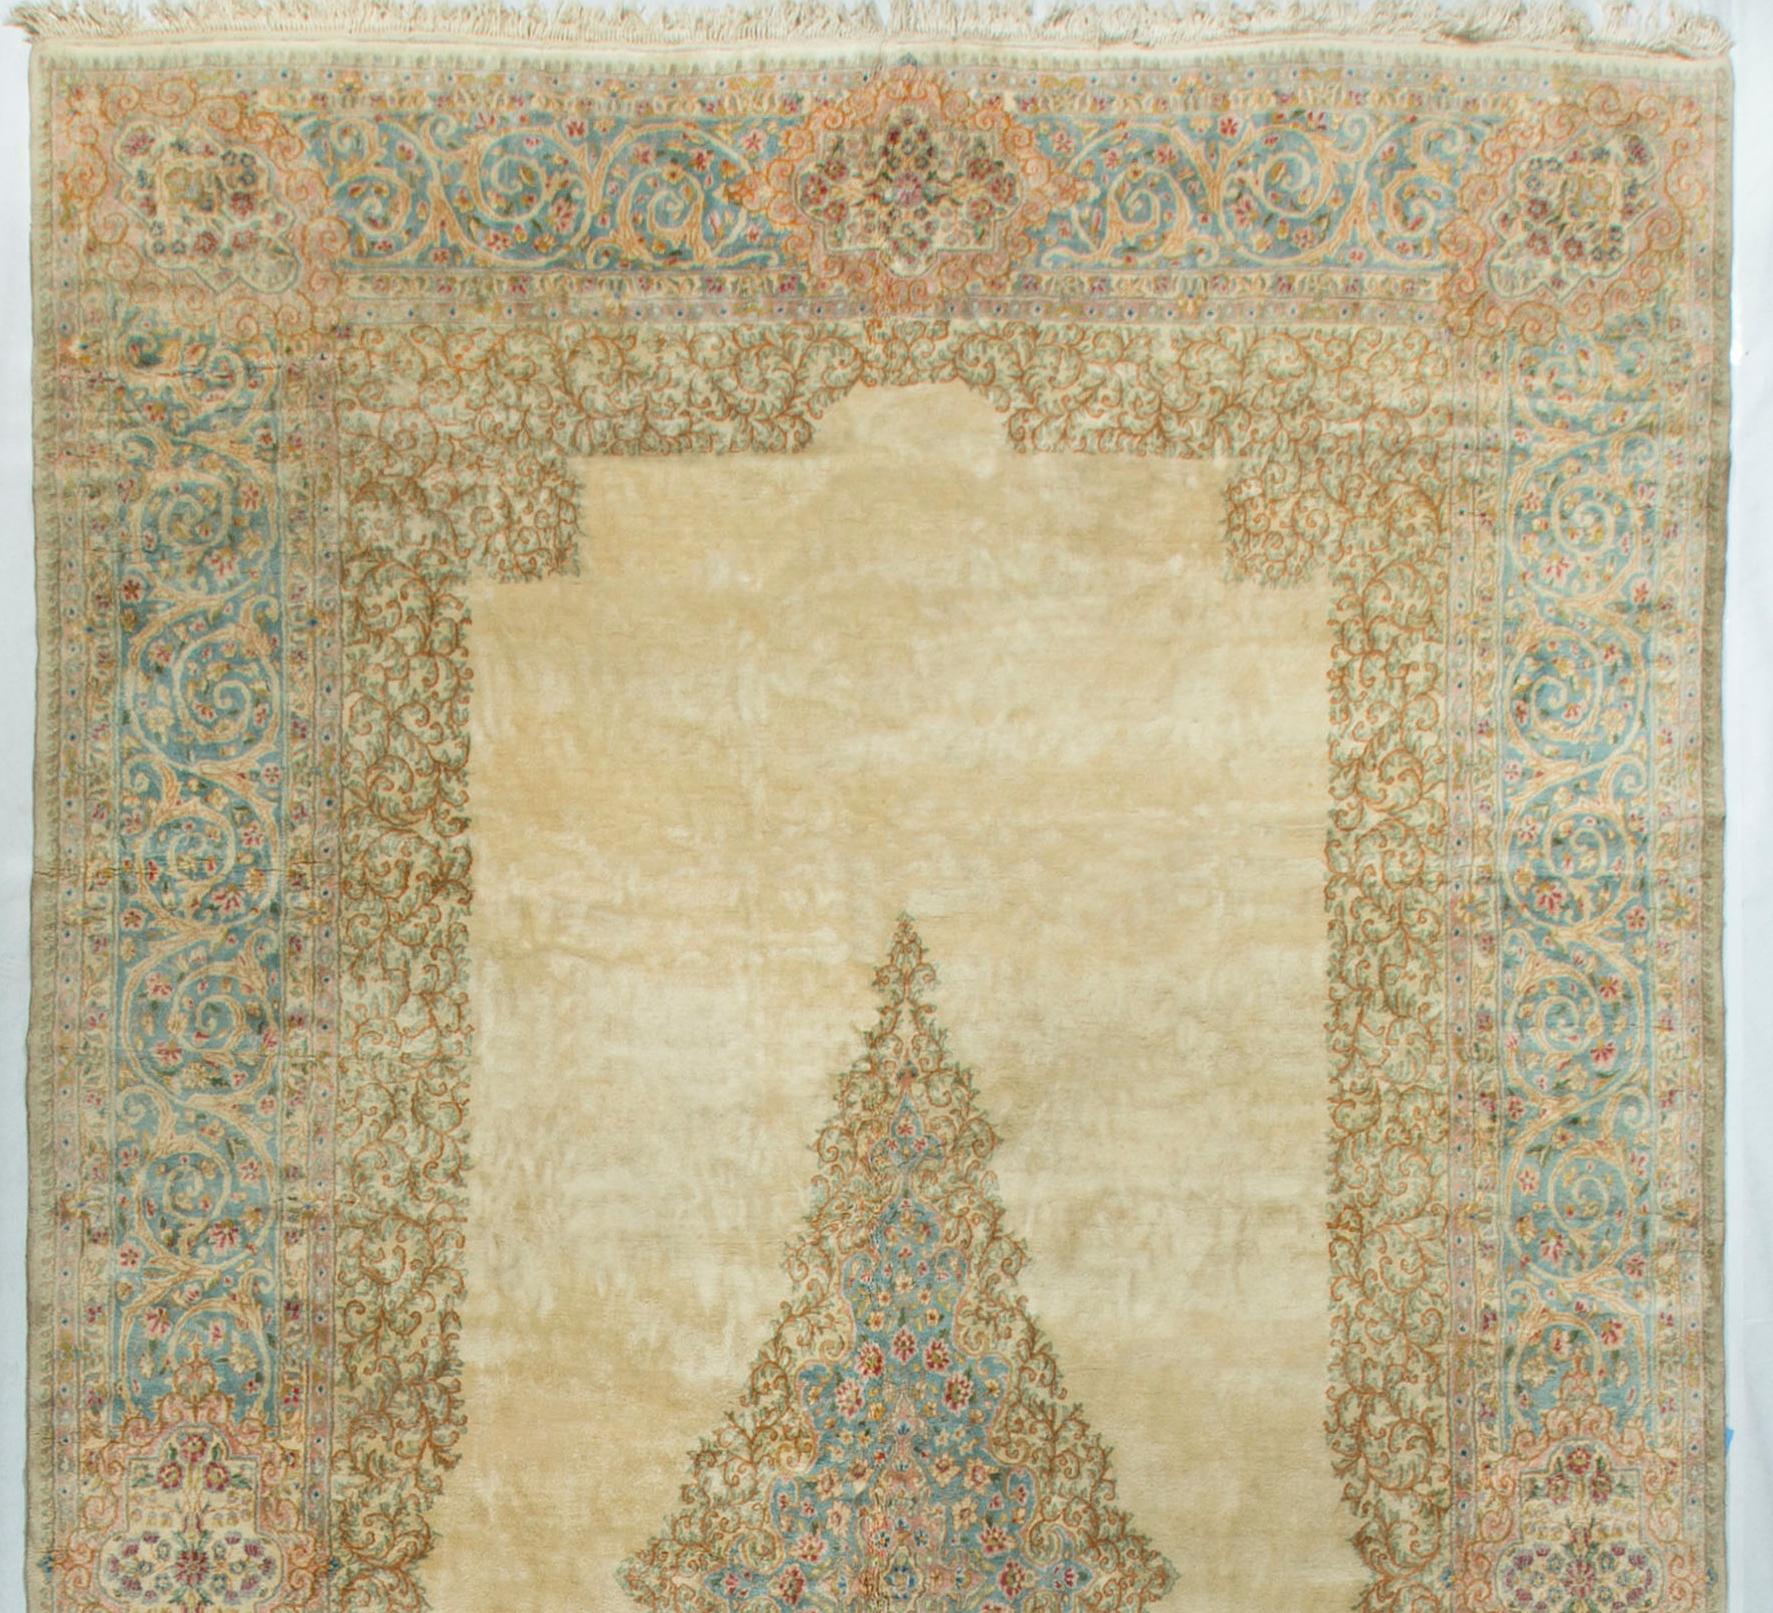 This wonderful vintage rug has an easygoing and subdued feel created by the central ivory ground enclosing a softly blue colored central medallion. All is surrounded by multiple borders, the main soft blue border repeating the medallion theme.